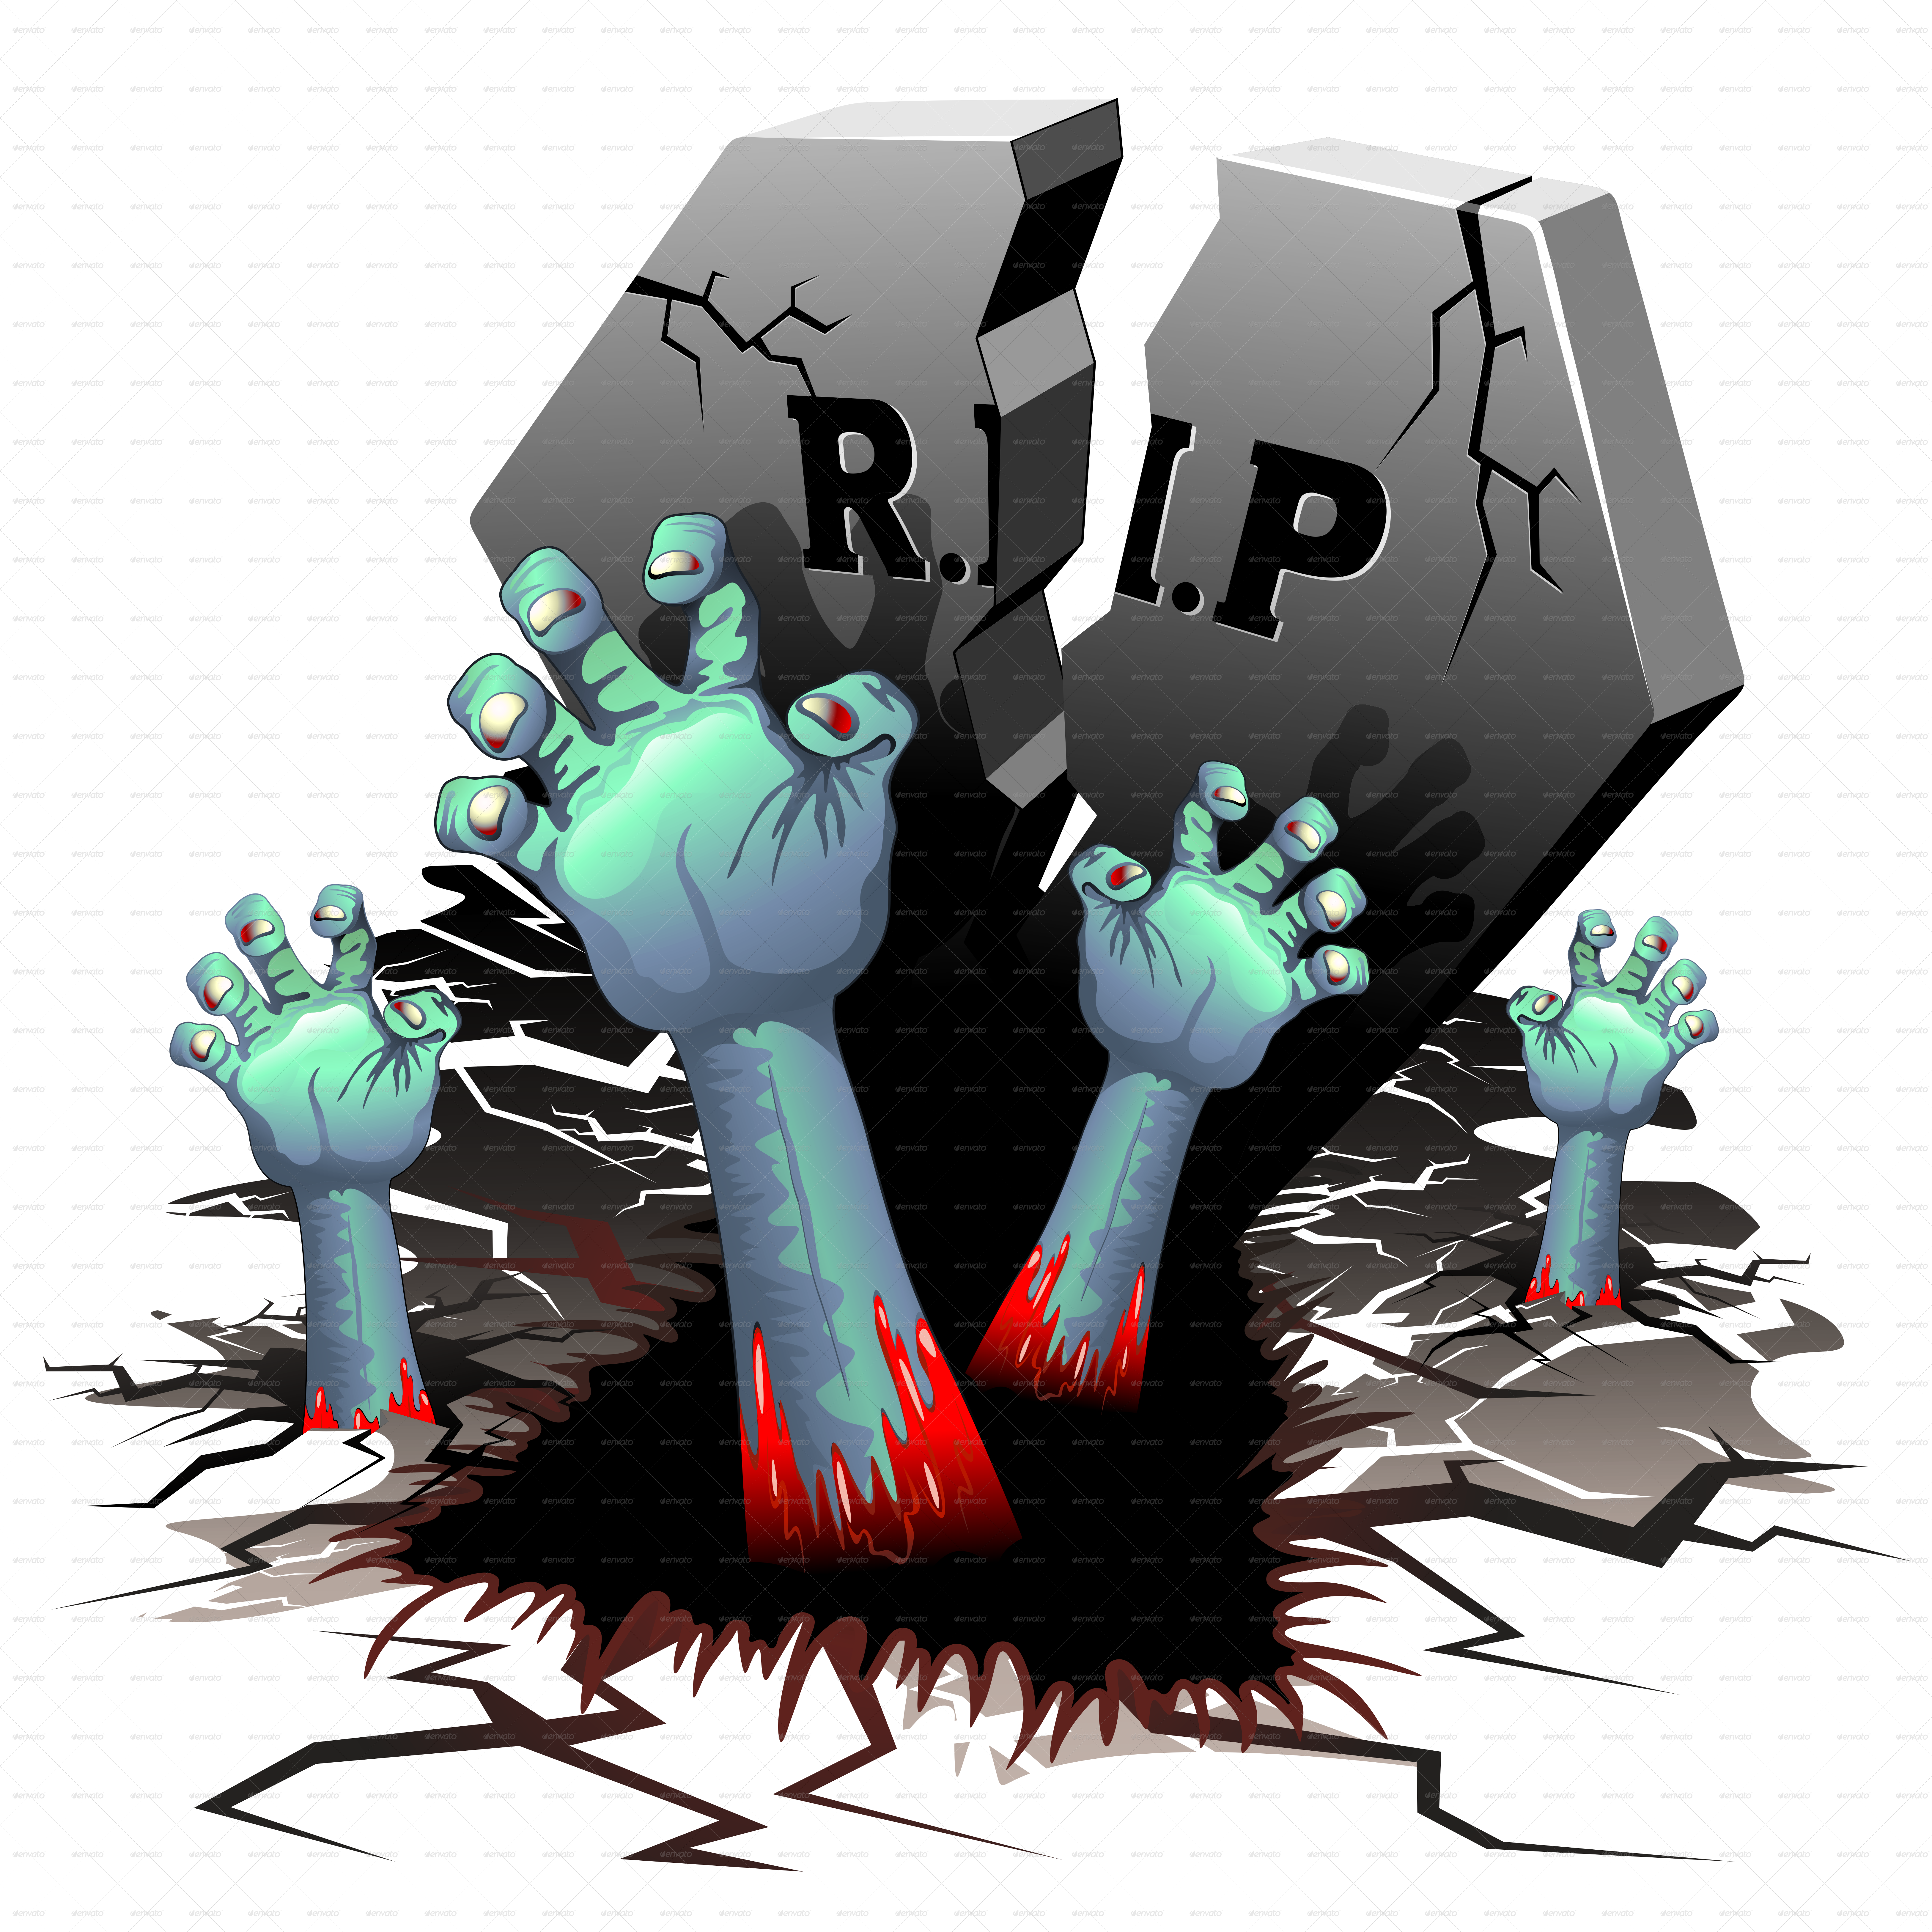 Creepy Zombie Hands On Cemetery - Zombies Bloody Hands On Cemetery Round Ornament (6500x6500)